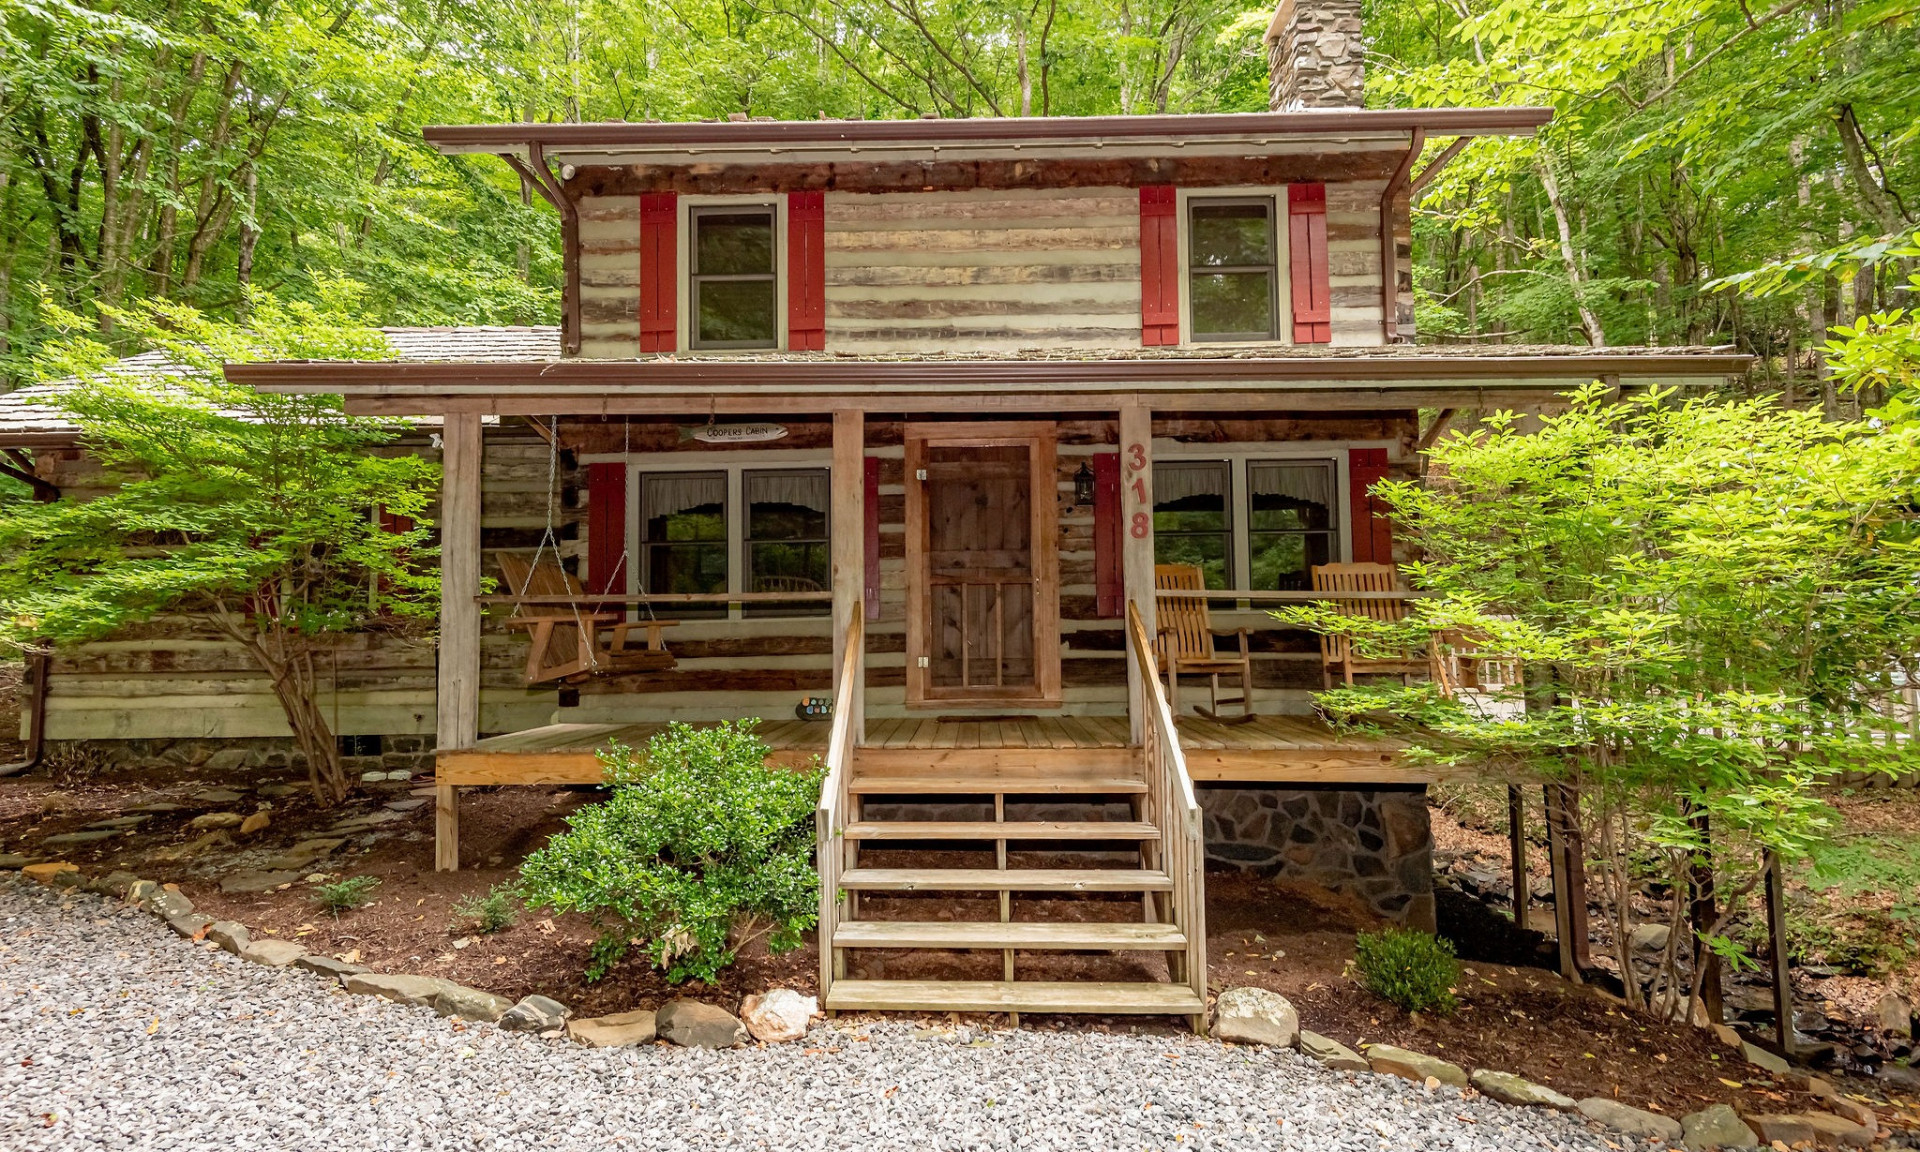 Have you been longing for the true log cabin living experience?  Take a look at this charming antique log cabin with a noisy mountain creek flowing along the back yard.